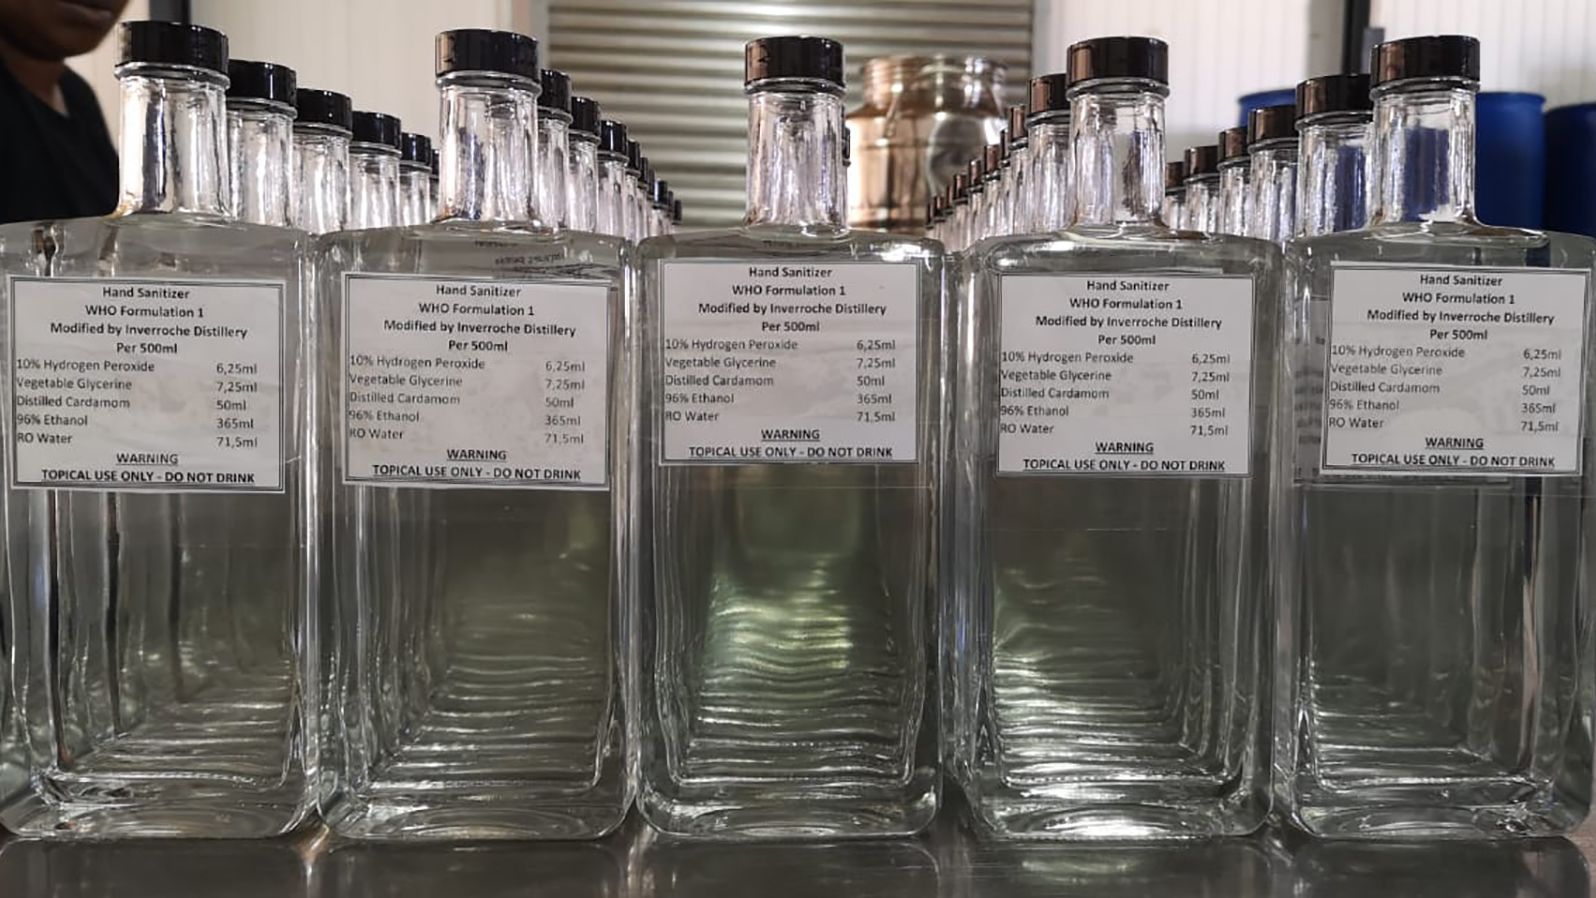 Bottles that would have once held Inverroche gin will now be used for hand sanitizer at the South African distillery.